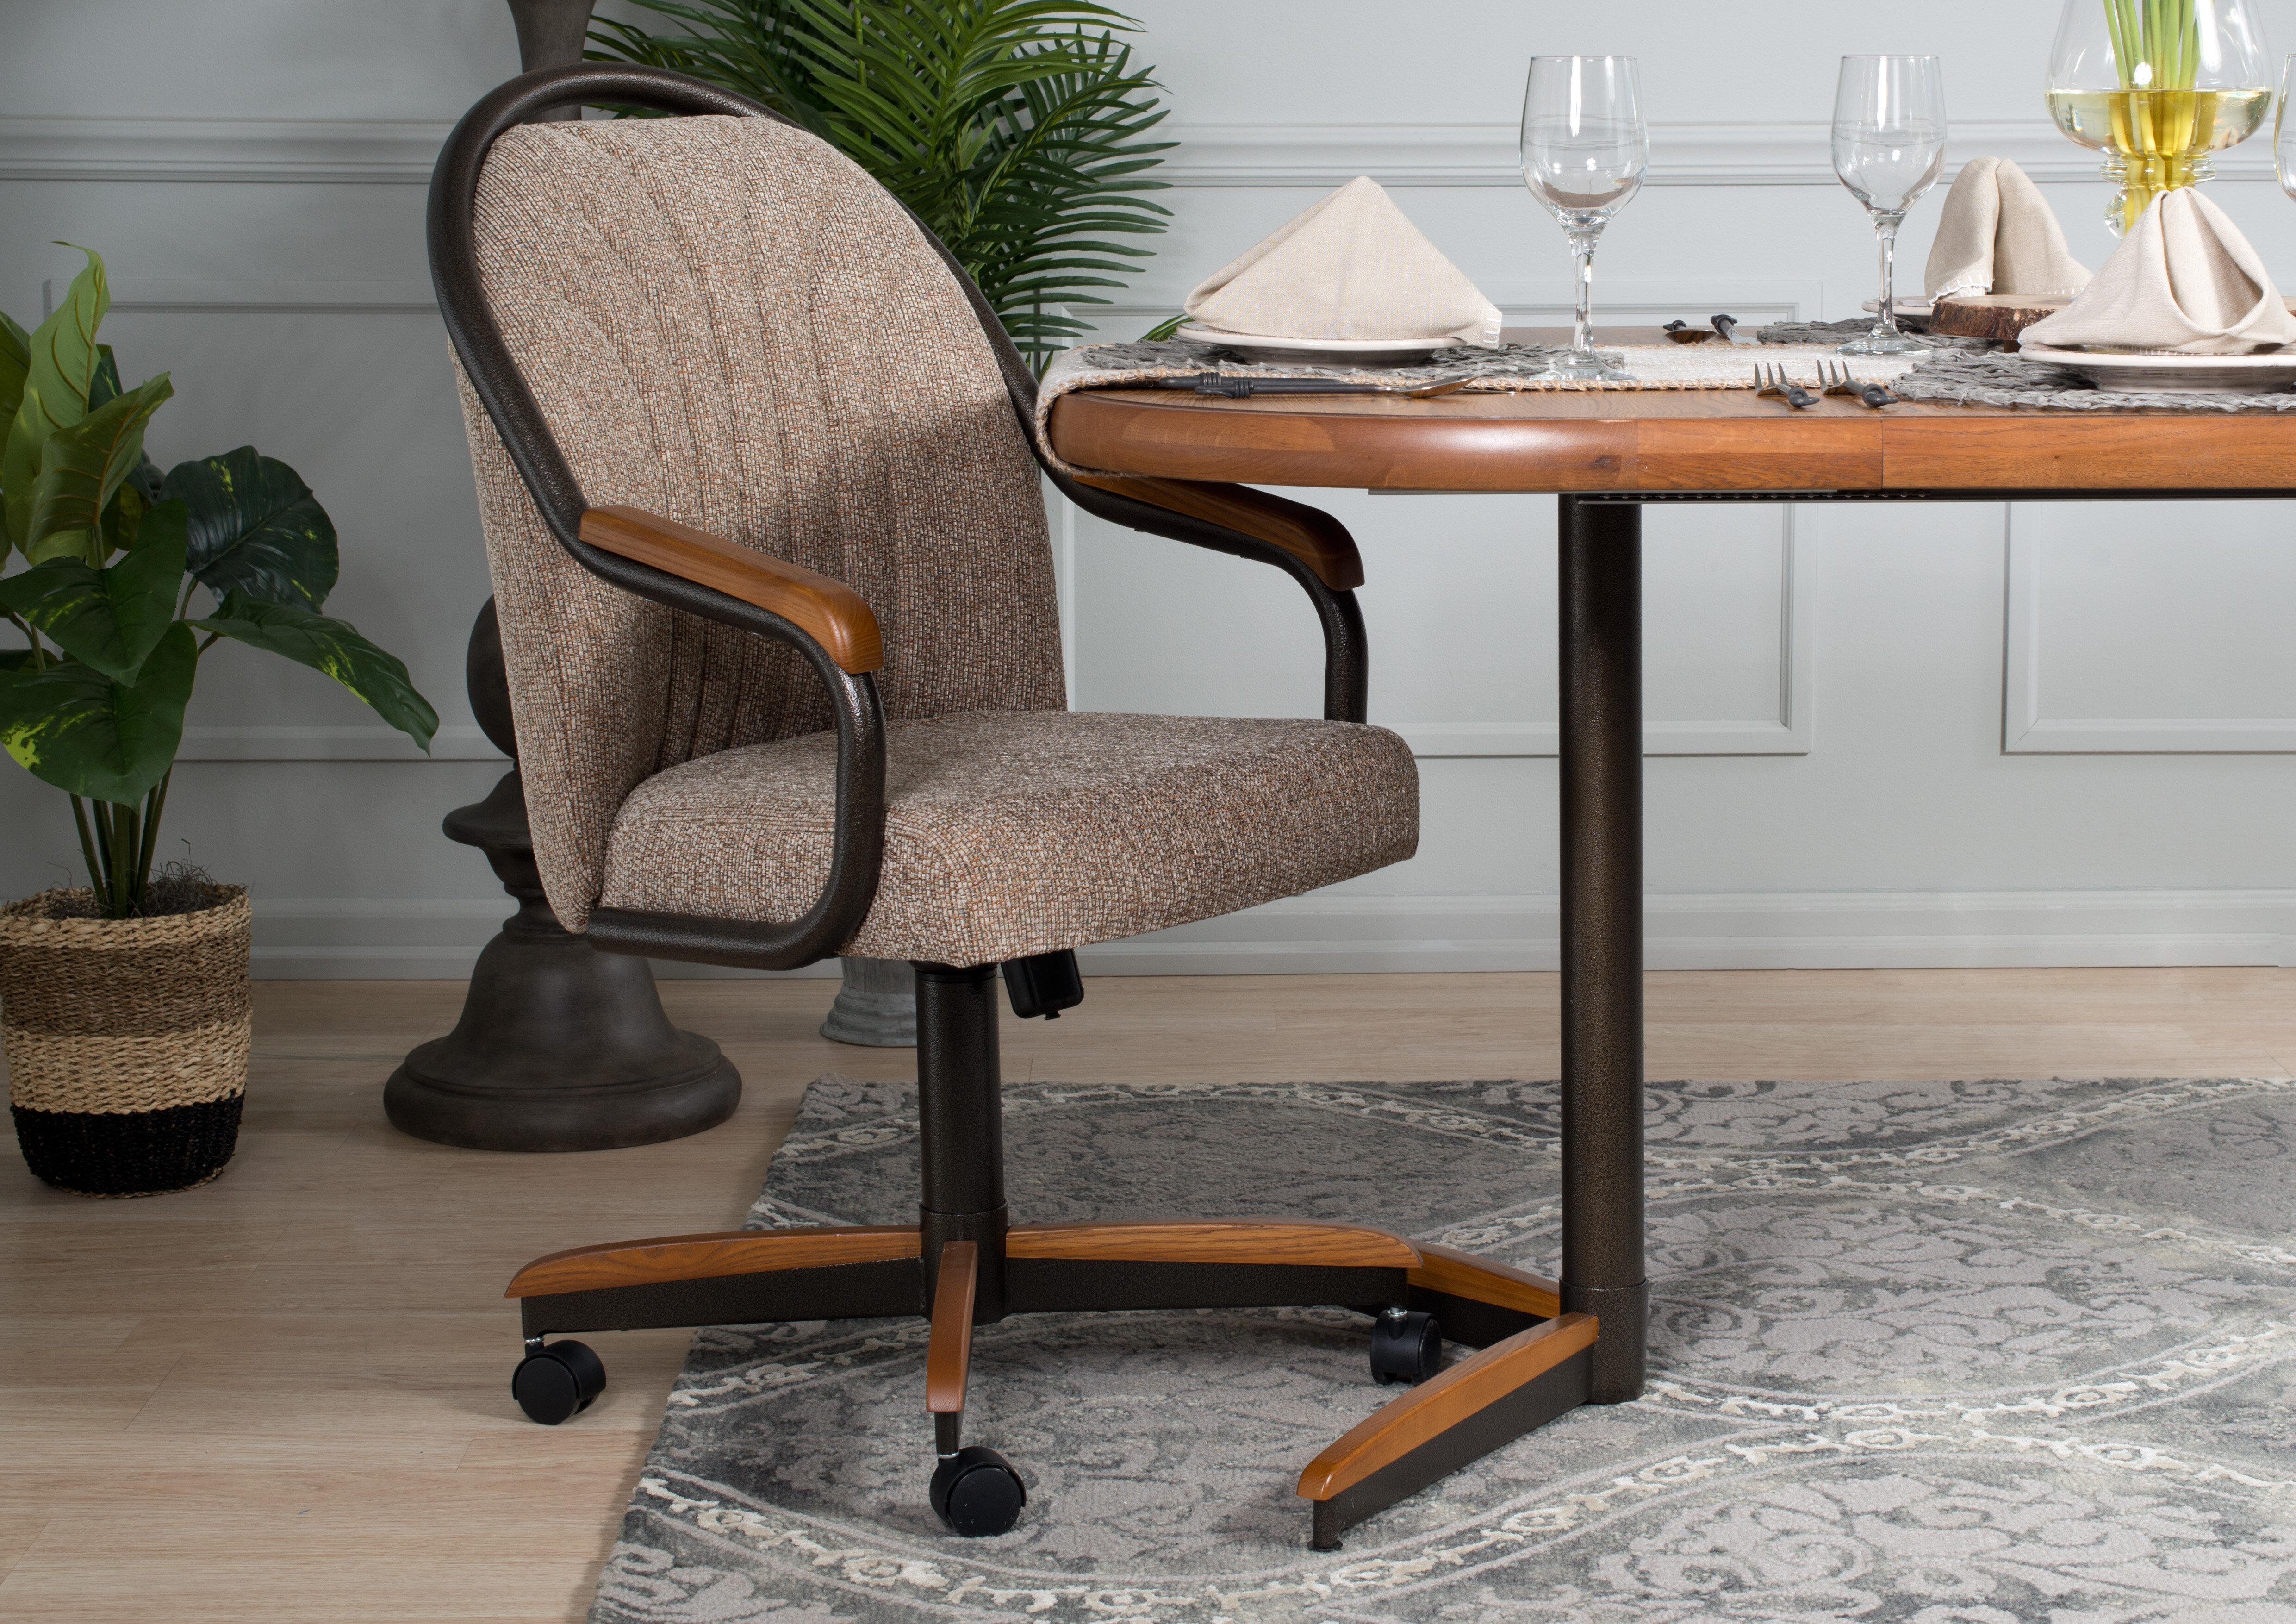 Armed Swivel Kitchen Dining Chairs You Ll Love In 2021 Wayfair